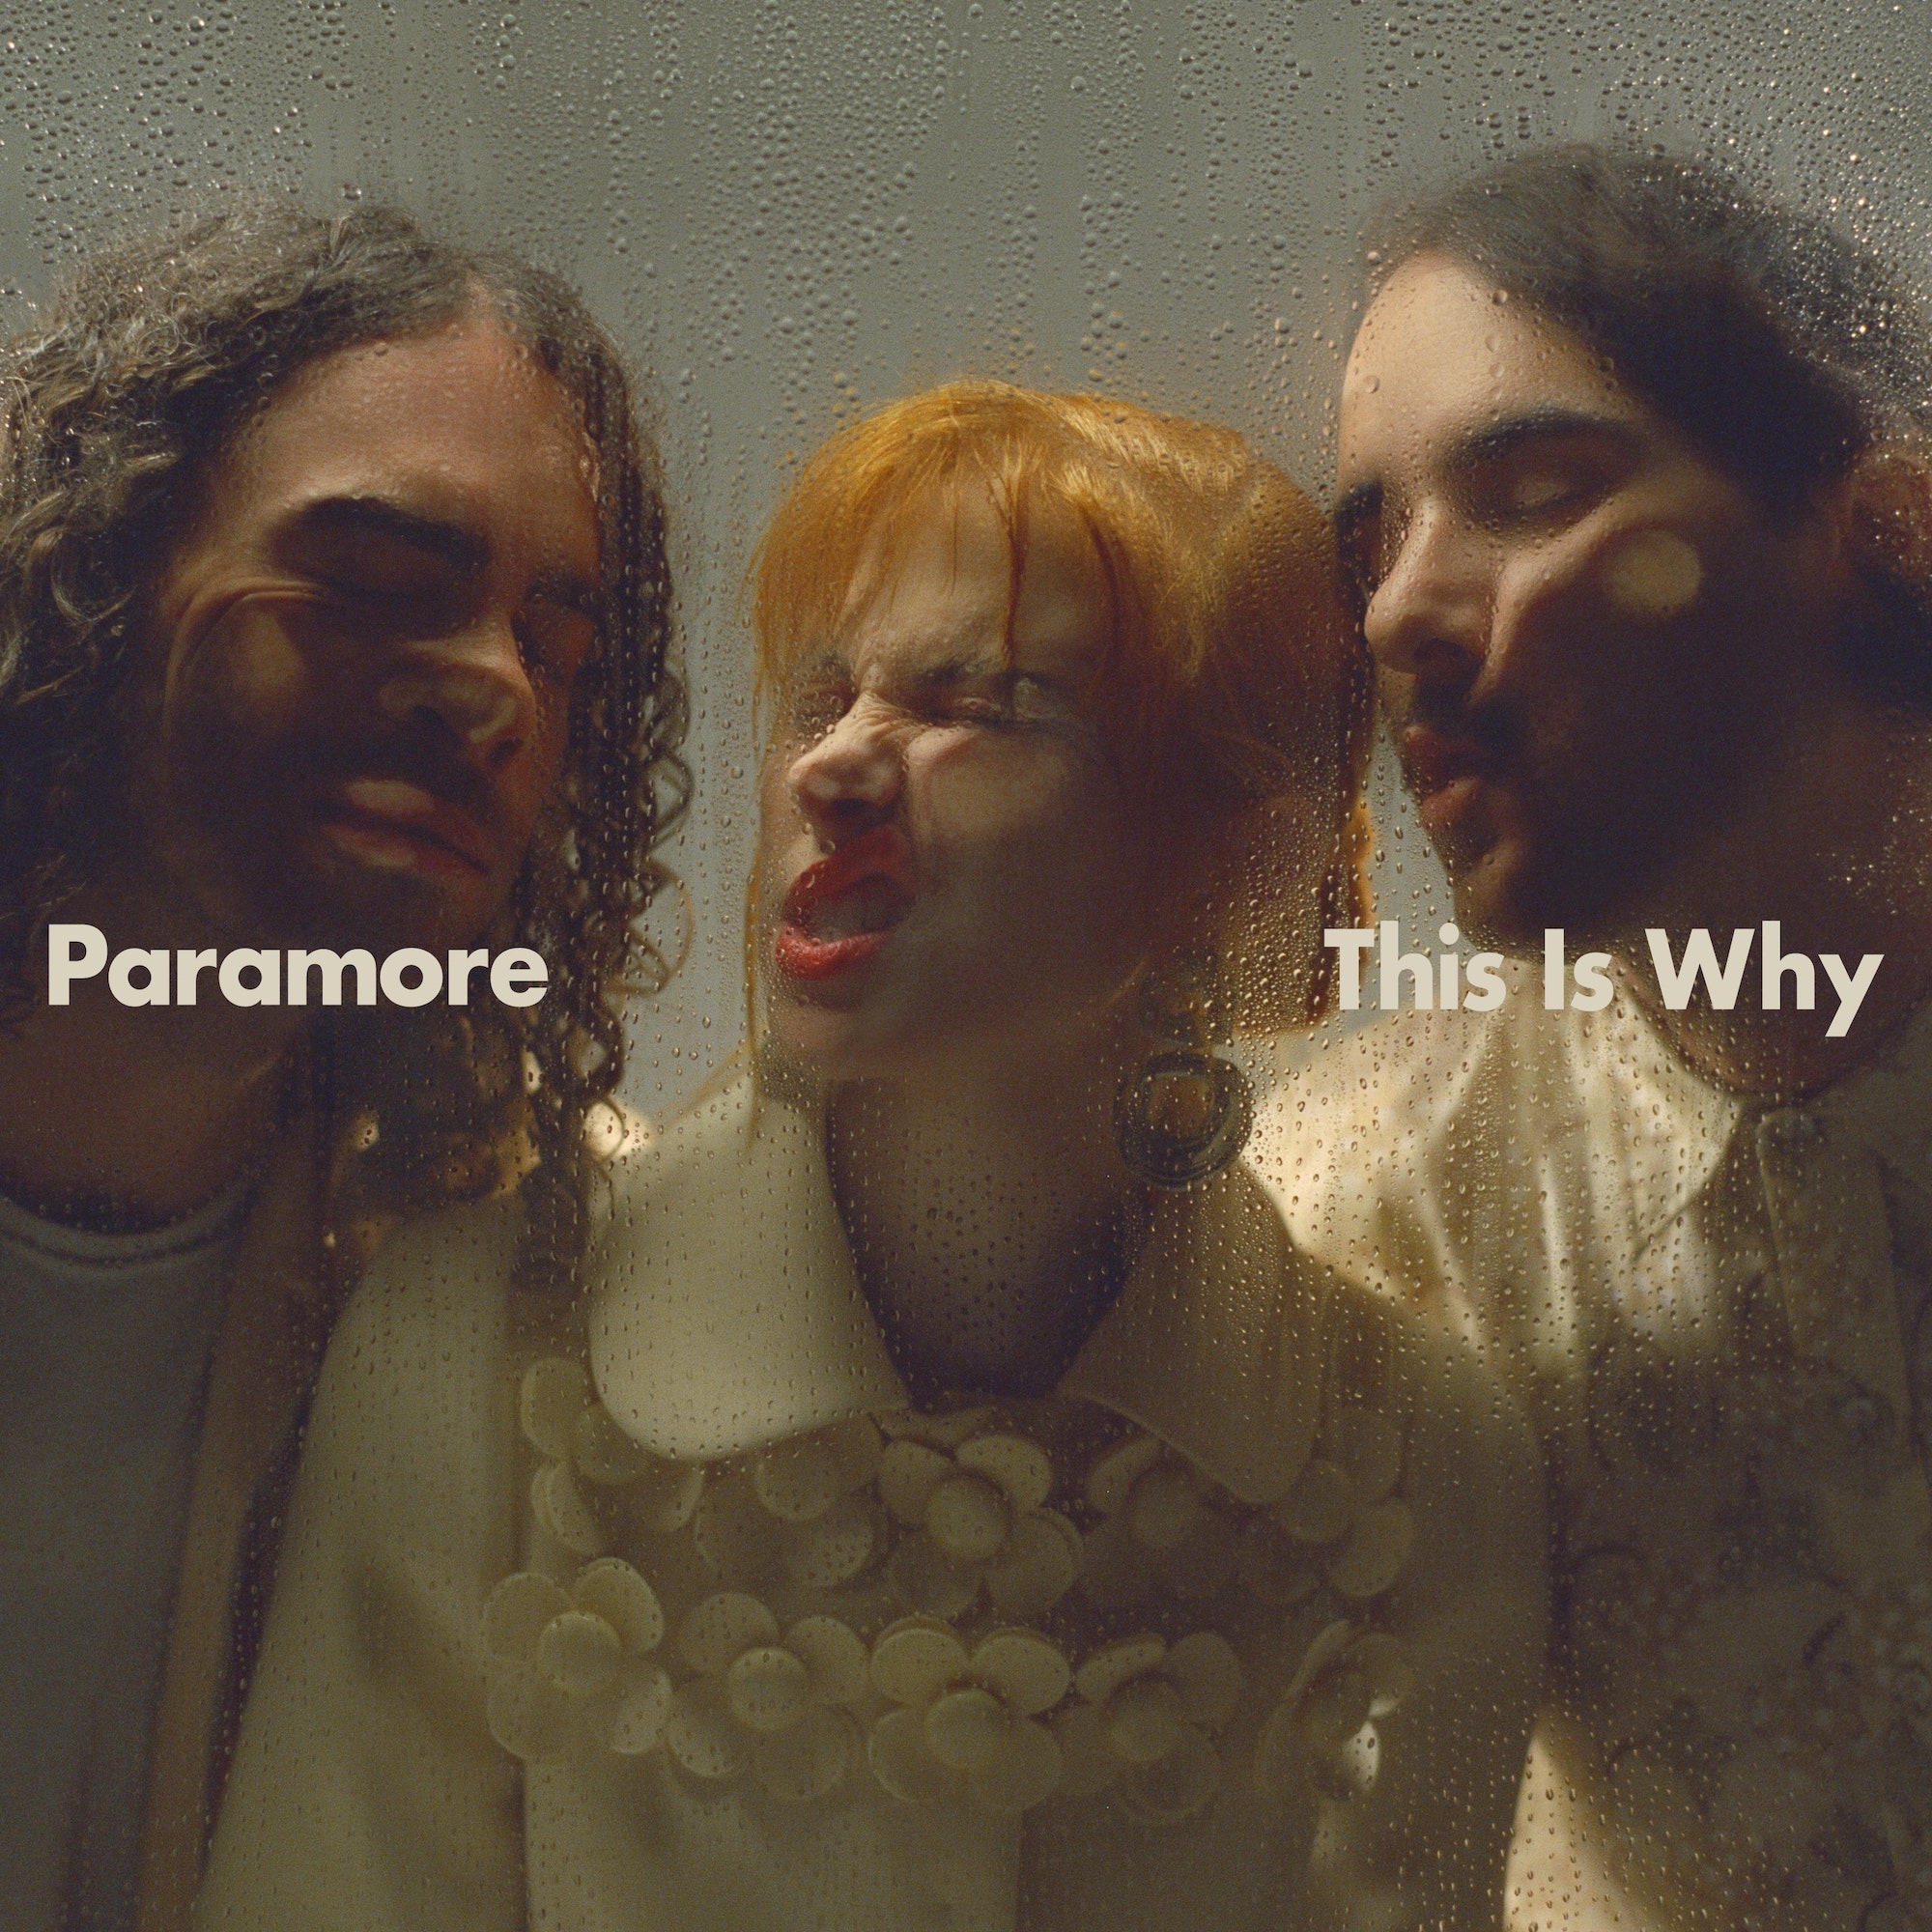 Paramore Updates on X: .@paramore's Brand New Eyes has surpassed